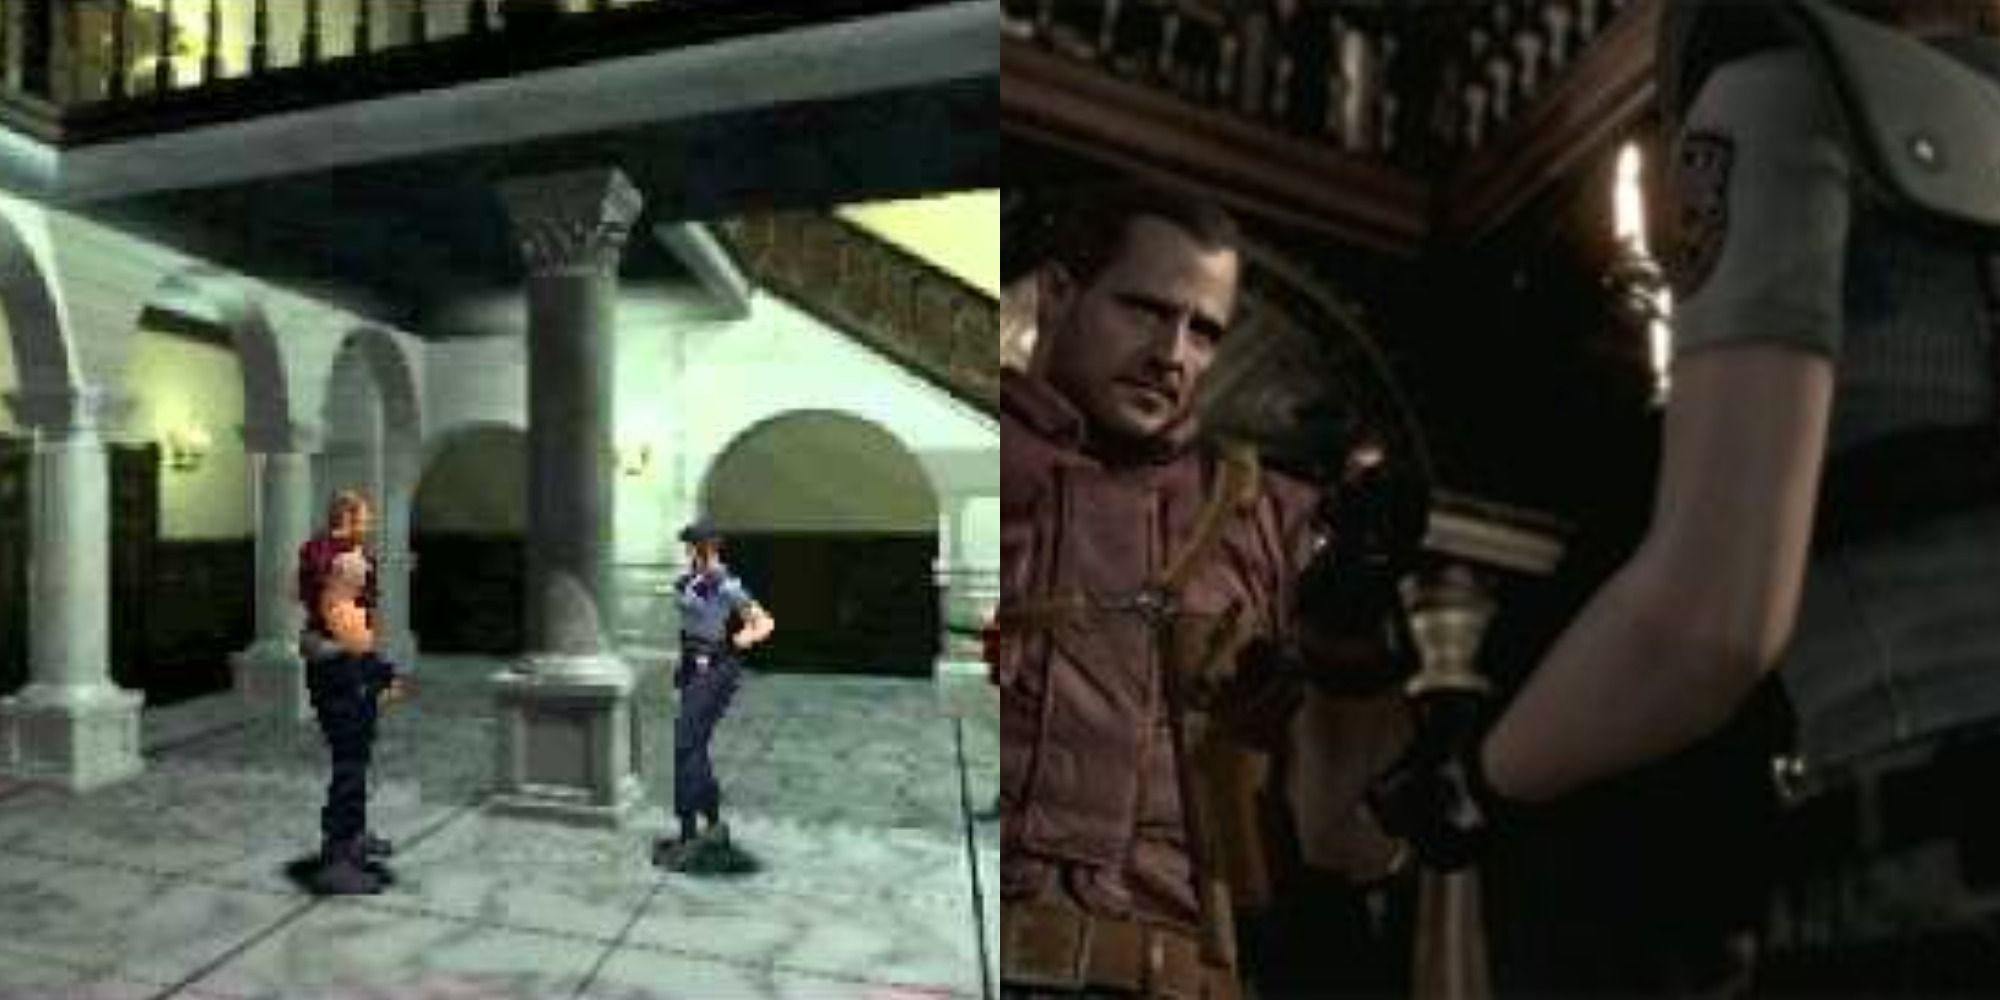 Press F To Pay Respects 10 Silliest Cutscenes In Gaming History Ranked